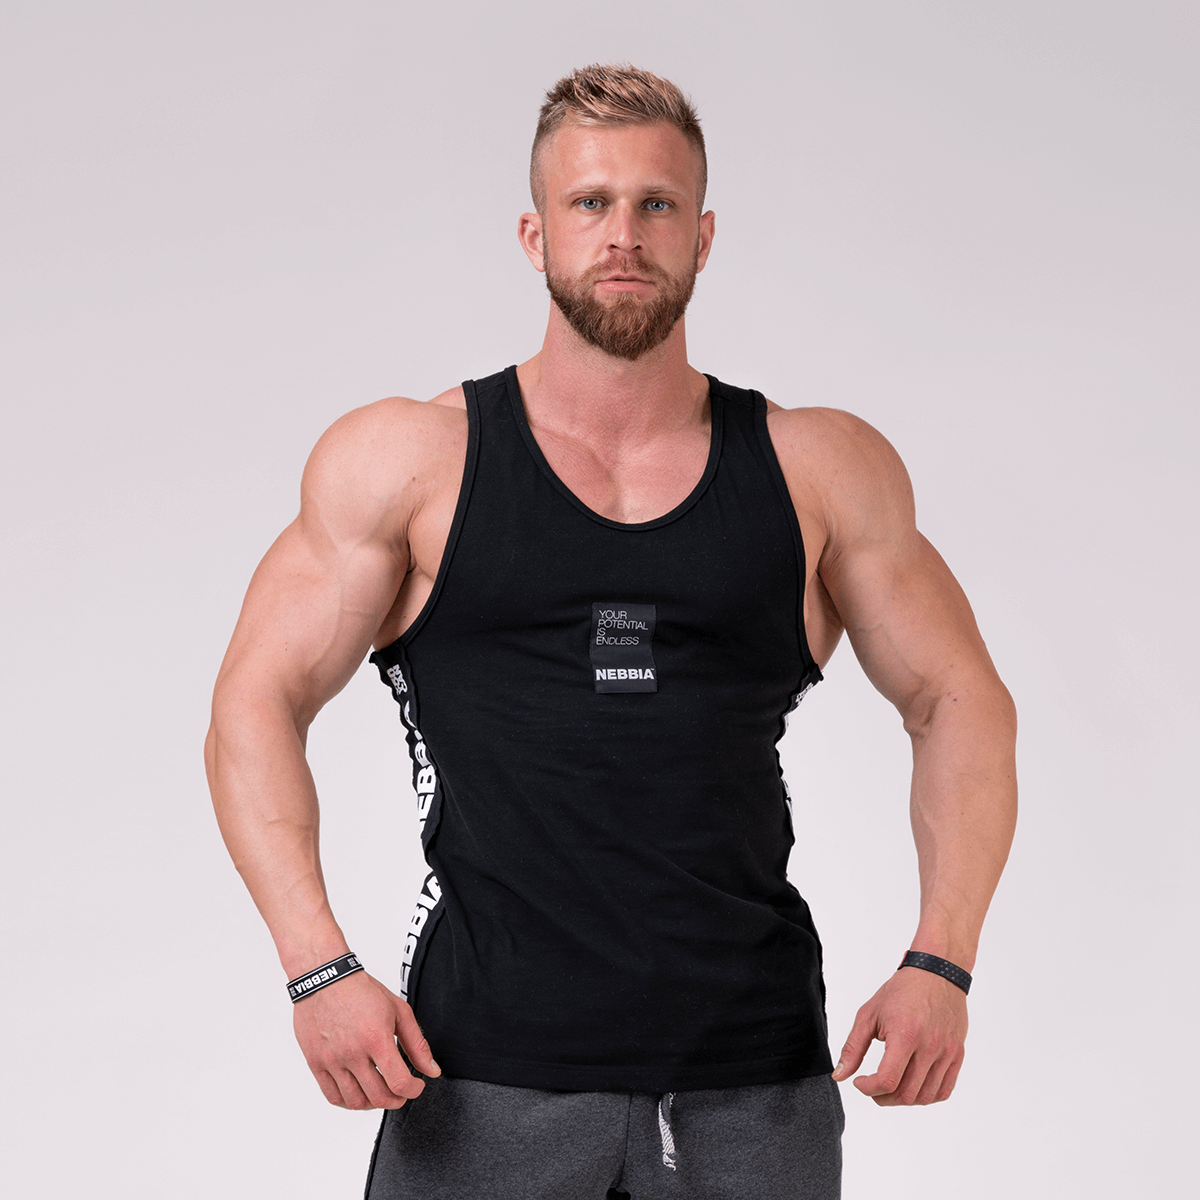 Fitness-Tanktop für Männer Nebbia "Your potential is endless" Tank Top